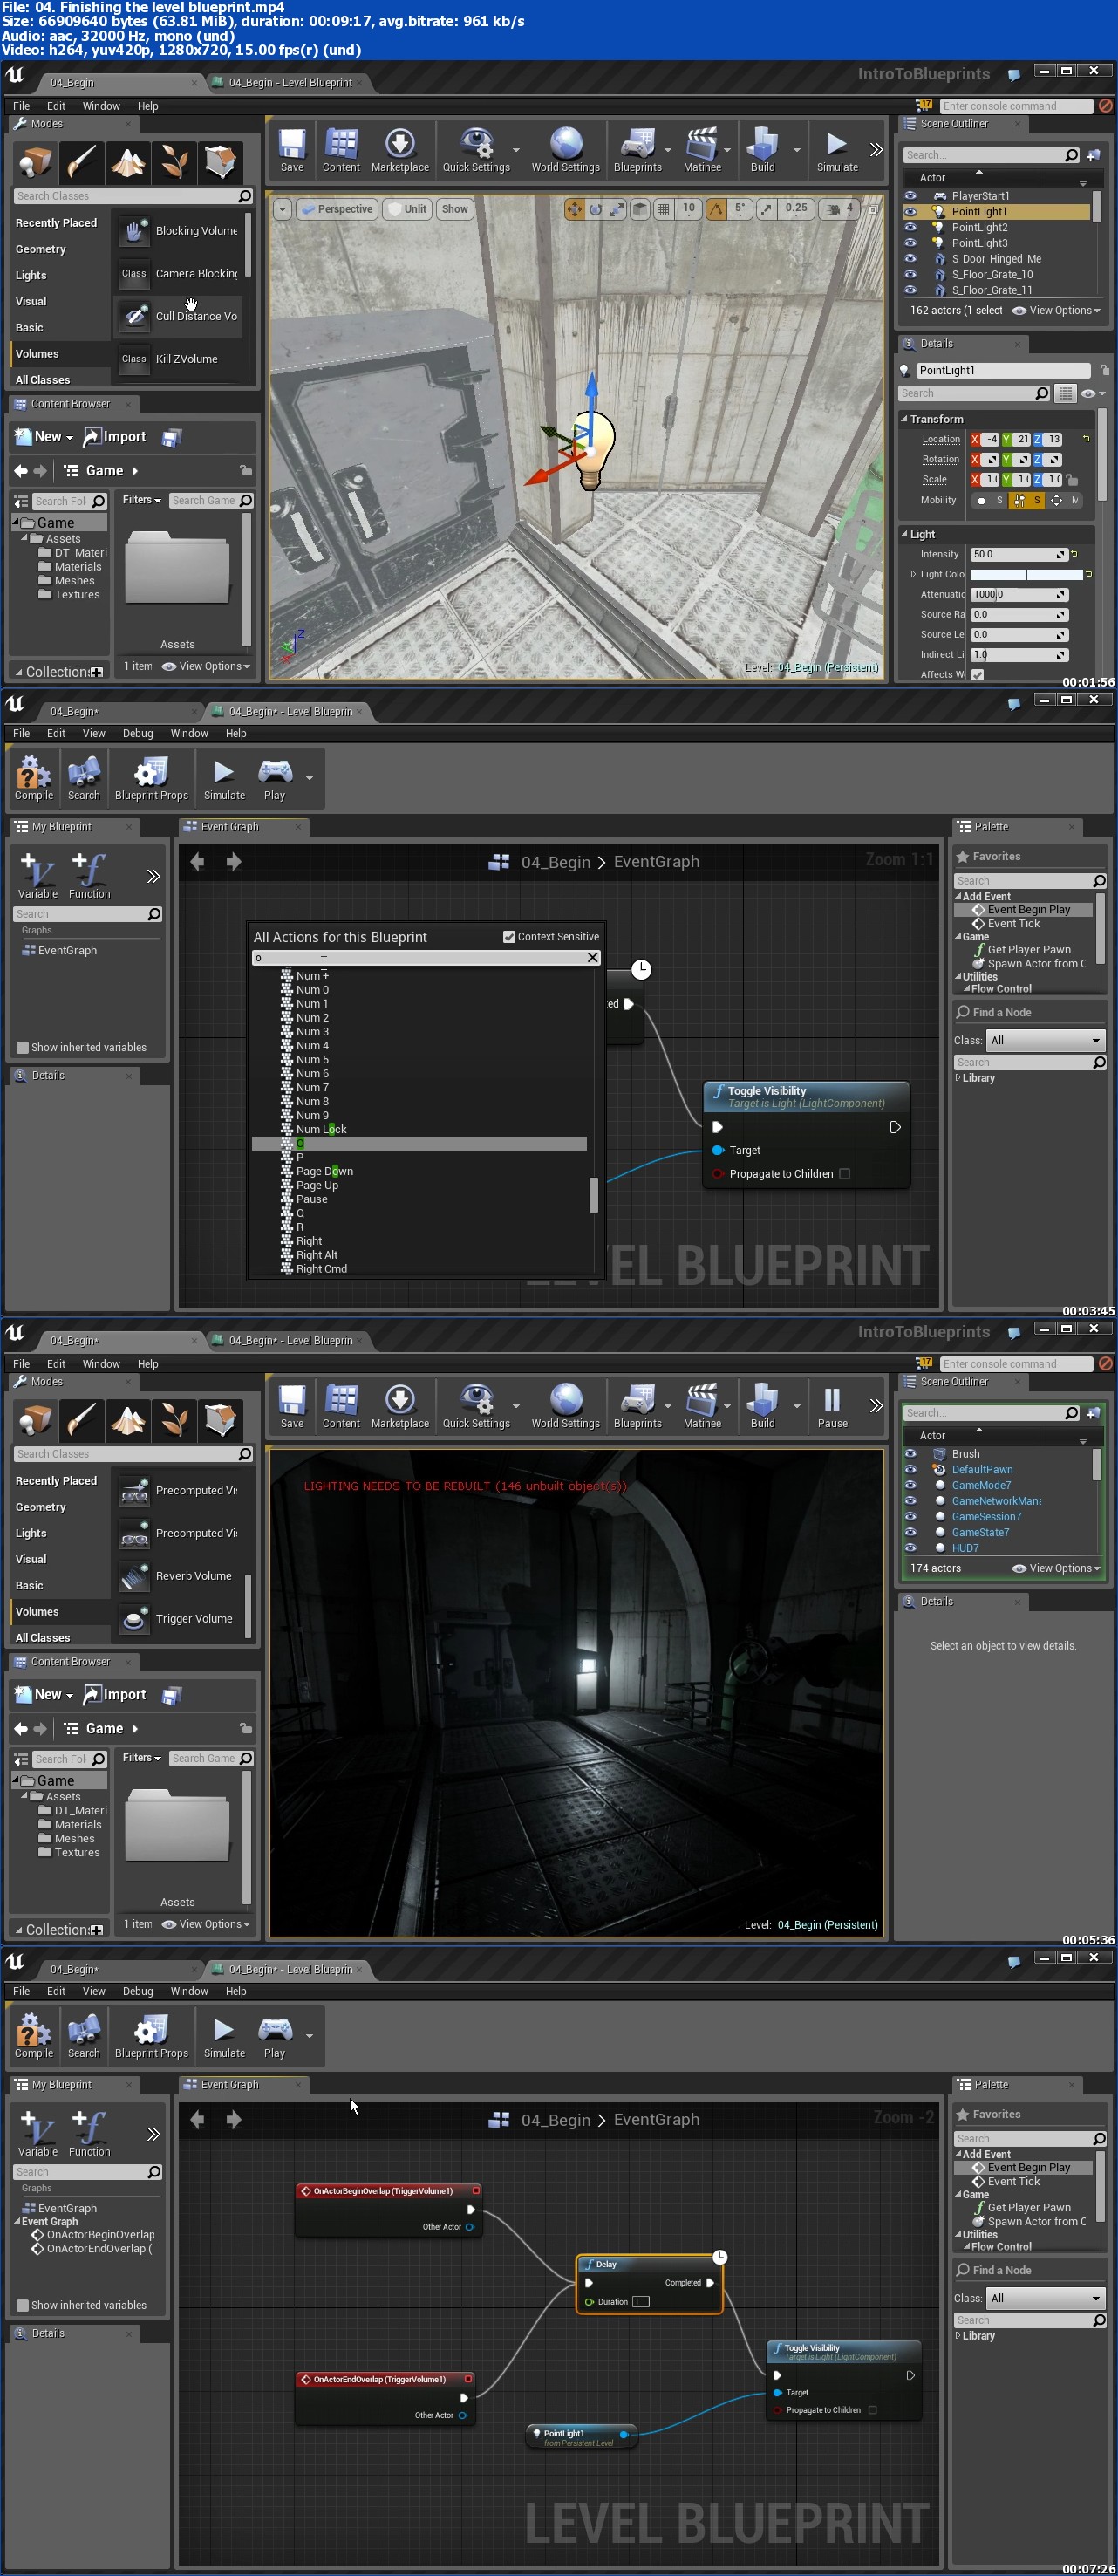 Dixxl Tuxxs - Introduction to Blueprint in Unreal Engine